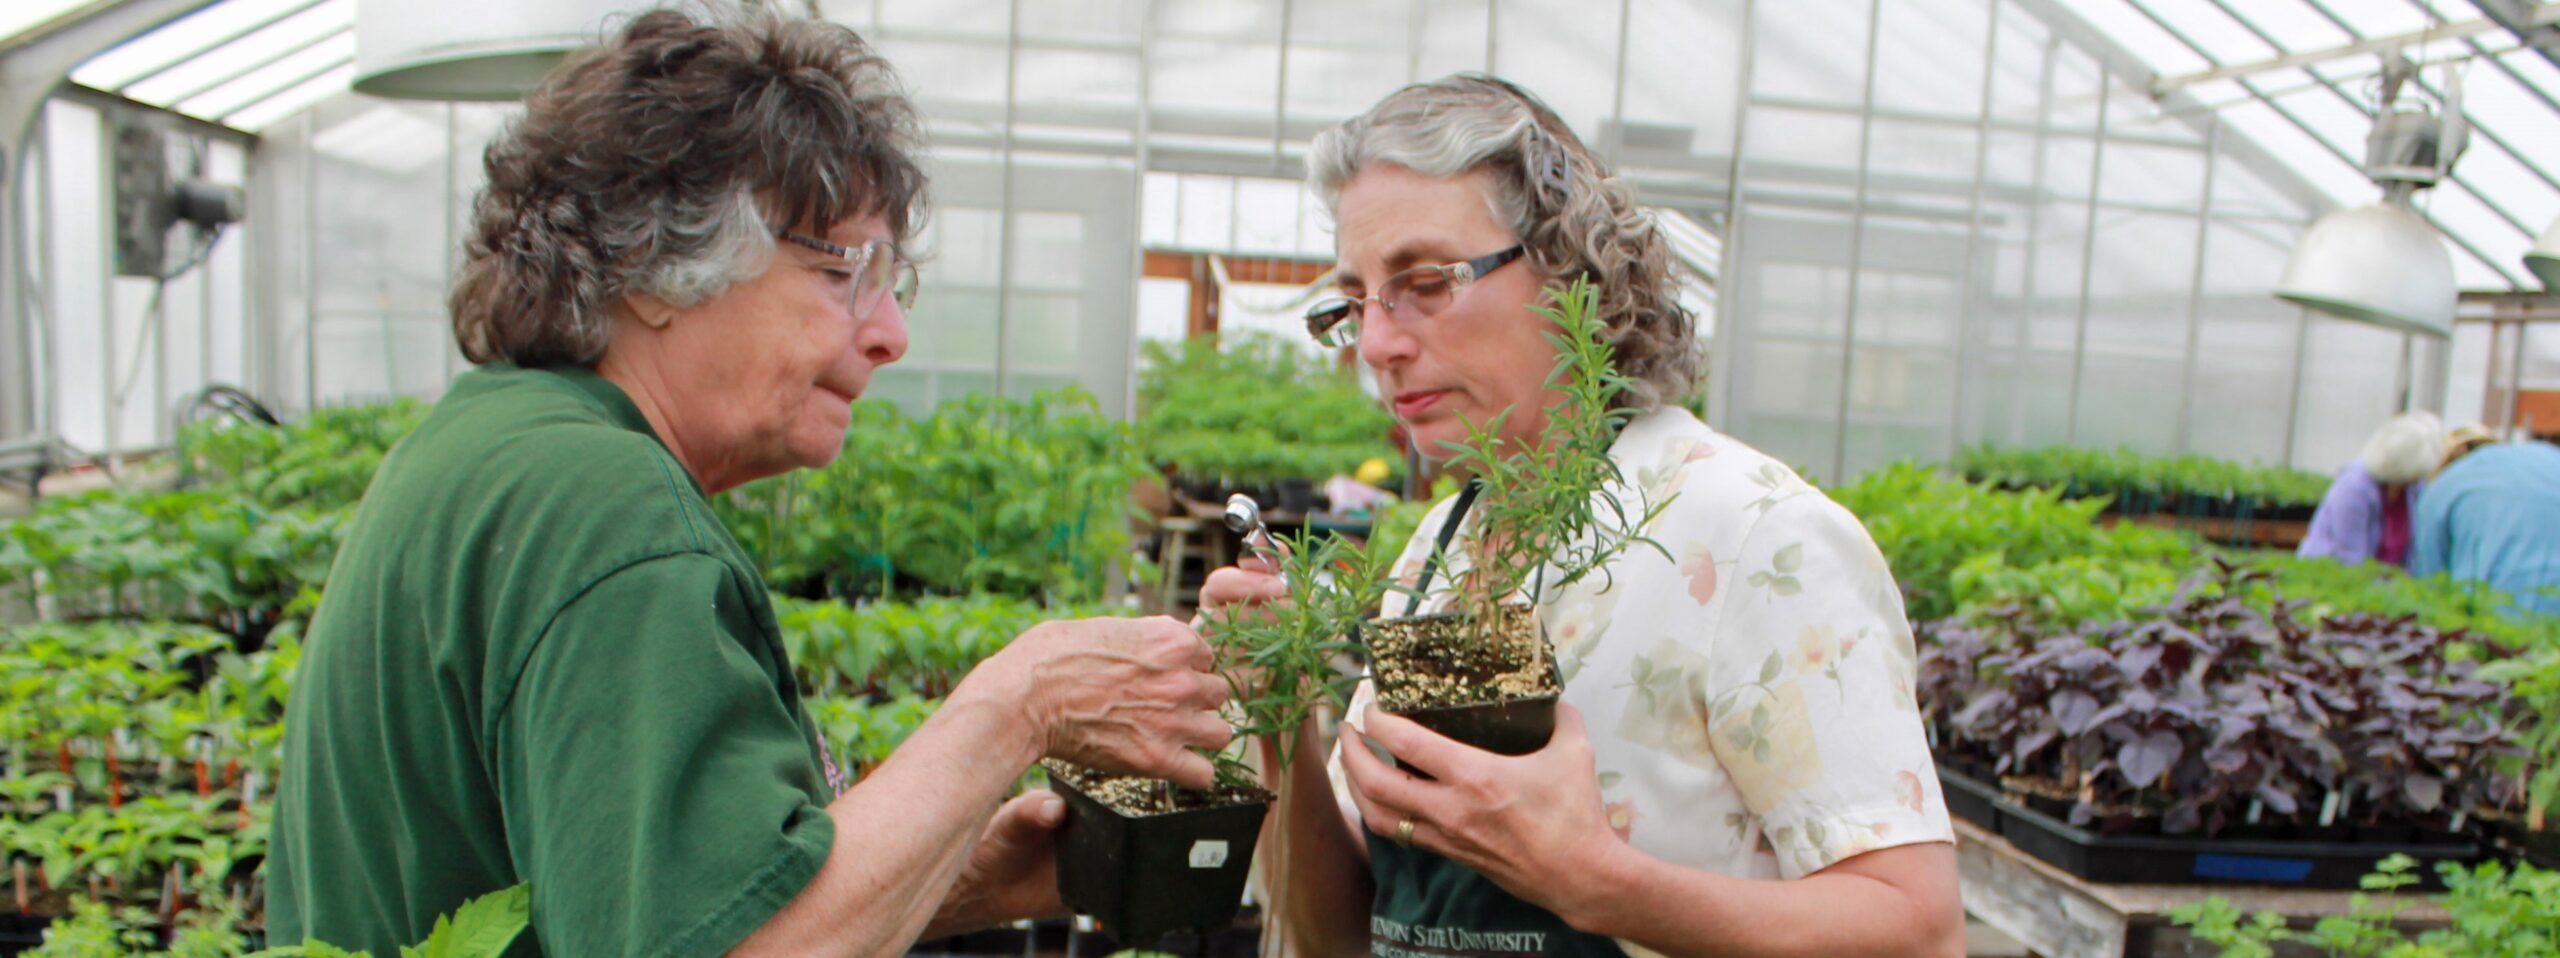 Two women examining plants in greenhouse.